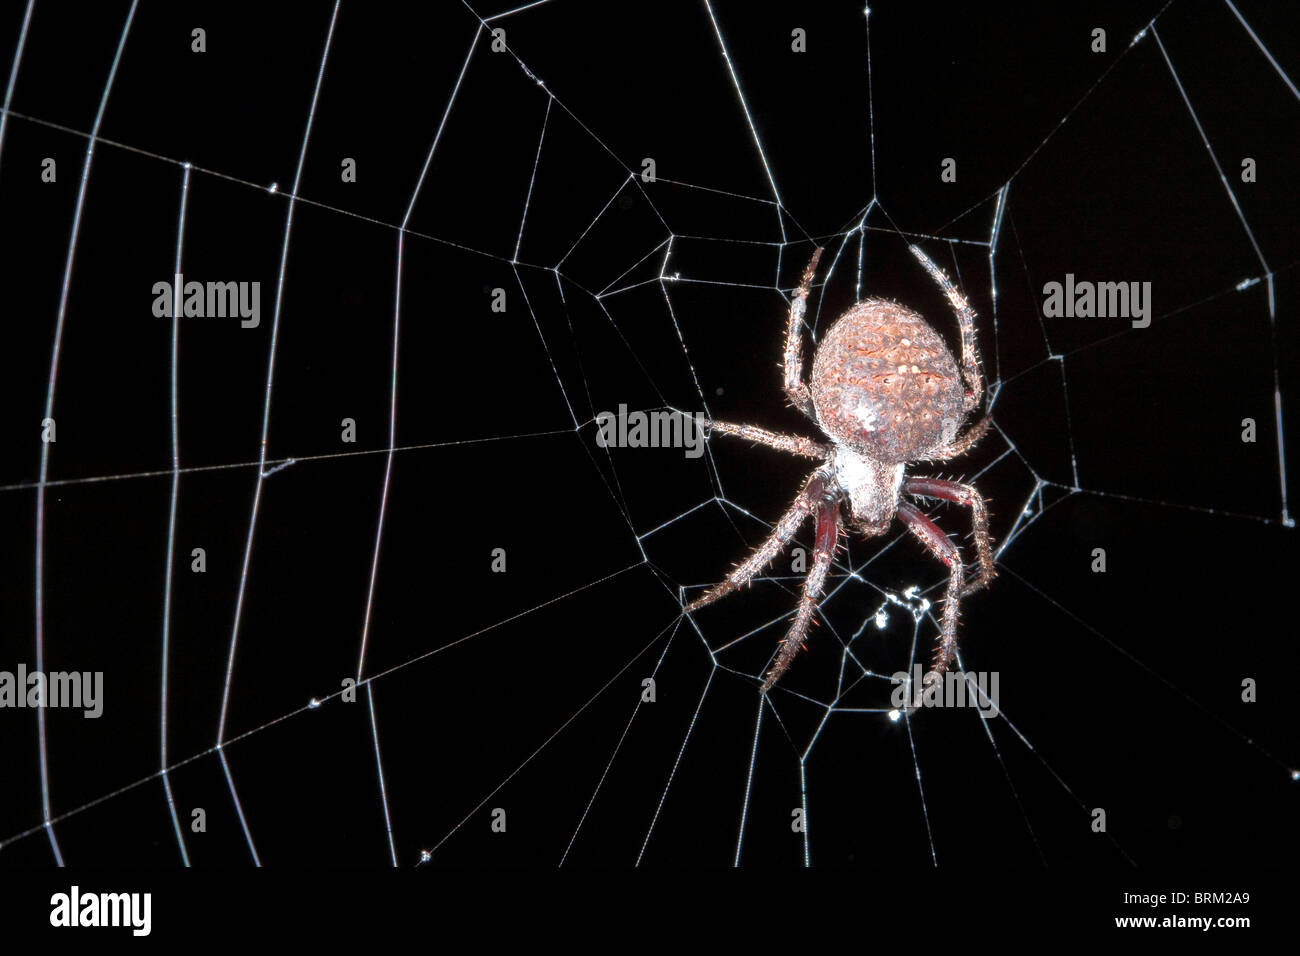 A spider on its web at night Stock Photo